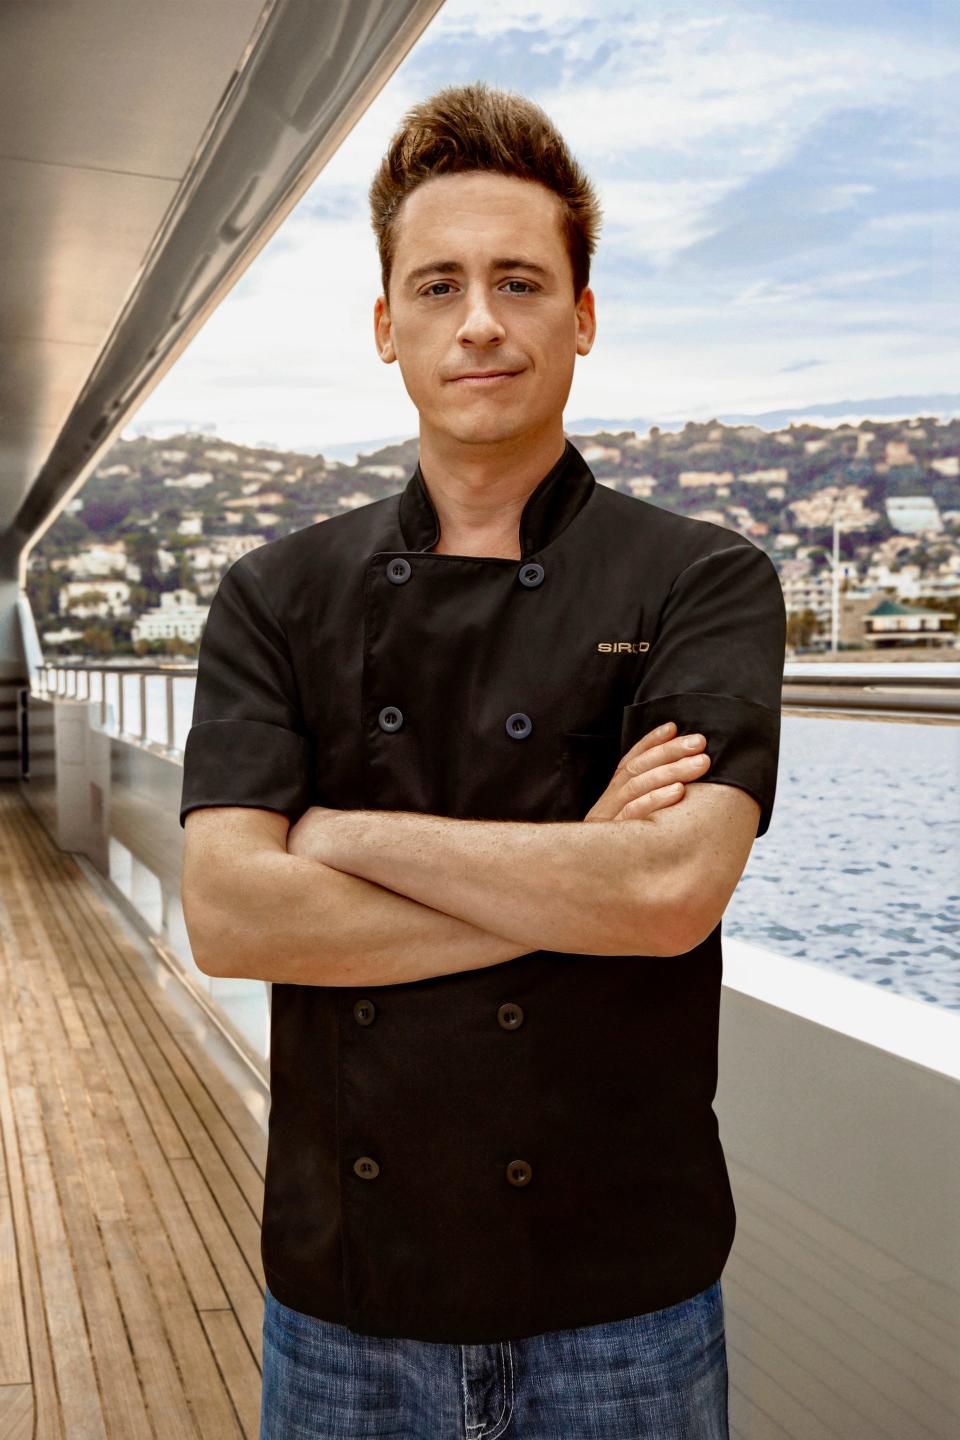 Chef Ben Robinson, who stars on the Bravo TV series "Below Deck," will headline a dinner event at the 2022 Palm Beach Food and Wine Festival.